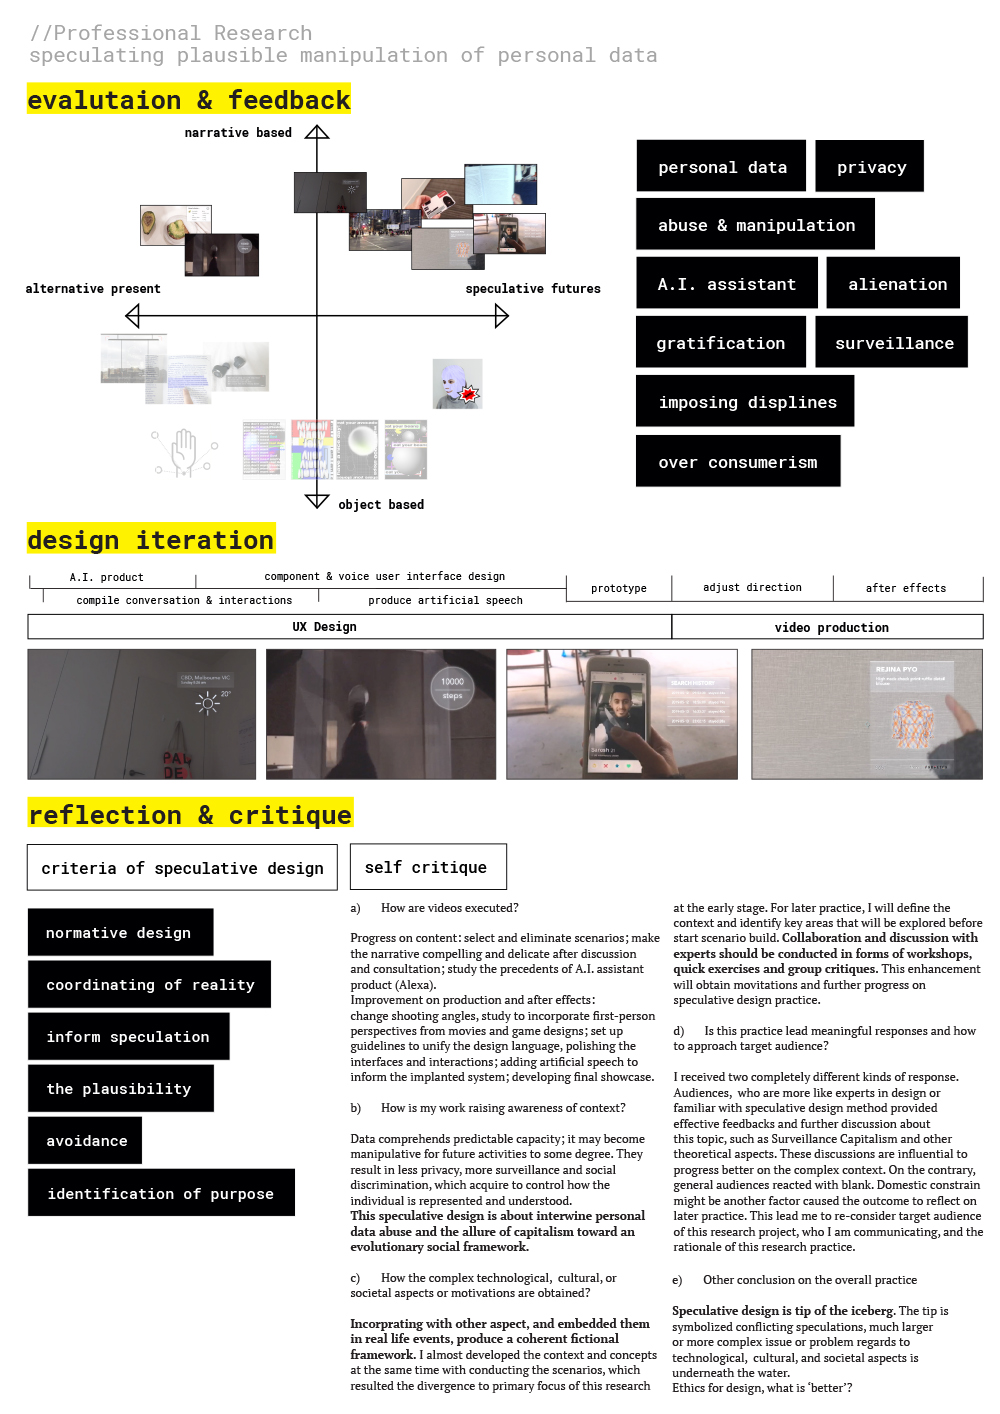 The fictional AI product and video clips are iterated during this phase. Through self critique, scenarios are refined and deliberated to provoke audiences' perceptions. Besides, this phase is a self reflection on overall research practice and speculative design motivations.